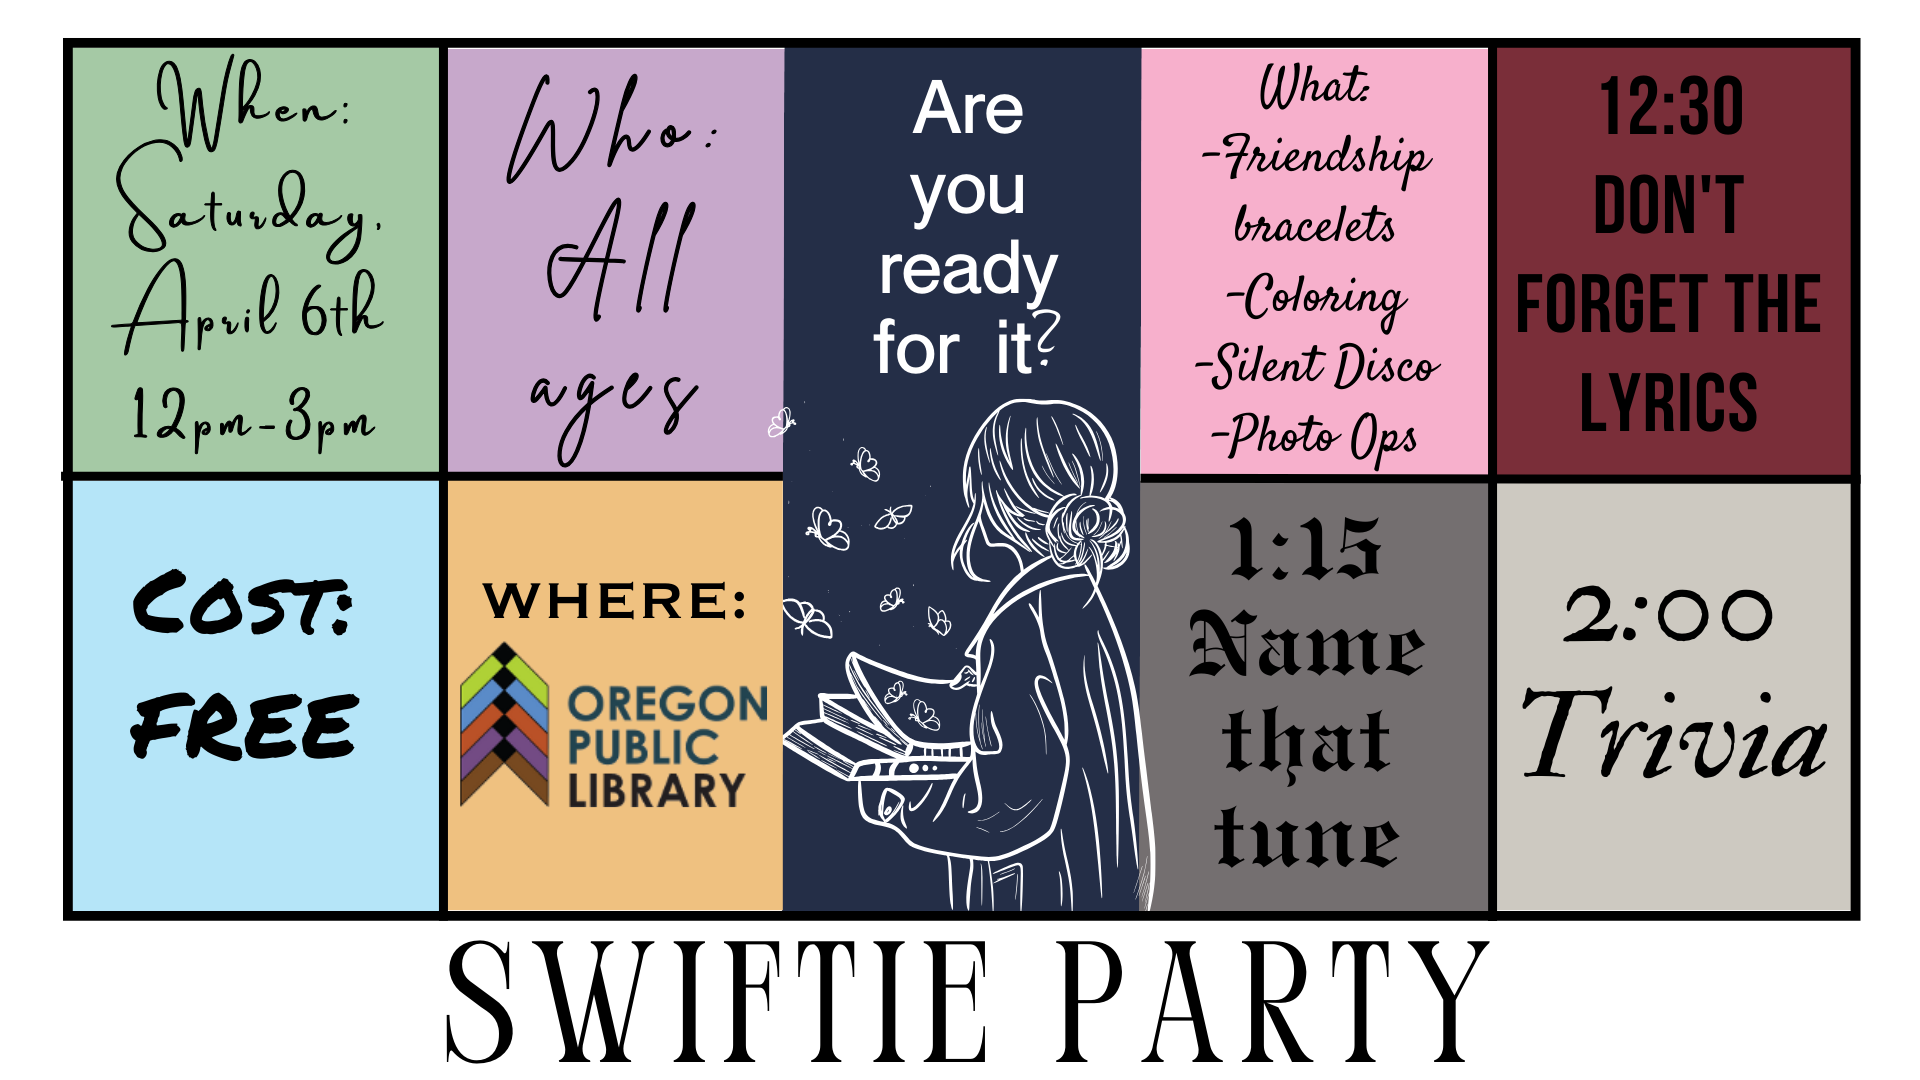 Swiftie Party for All Ages